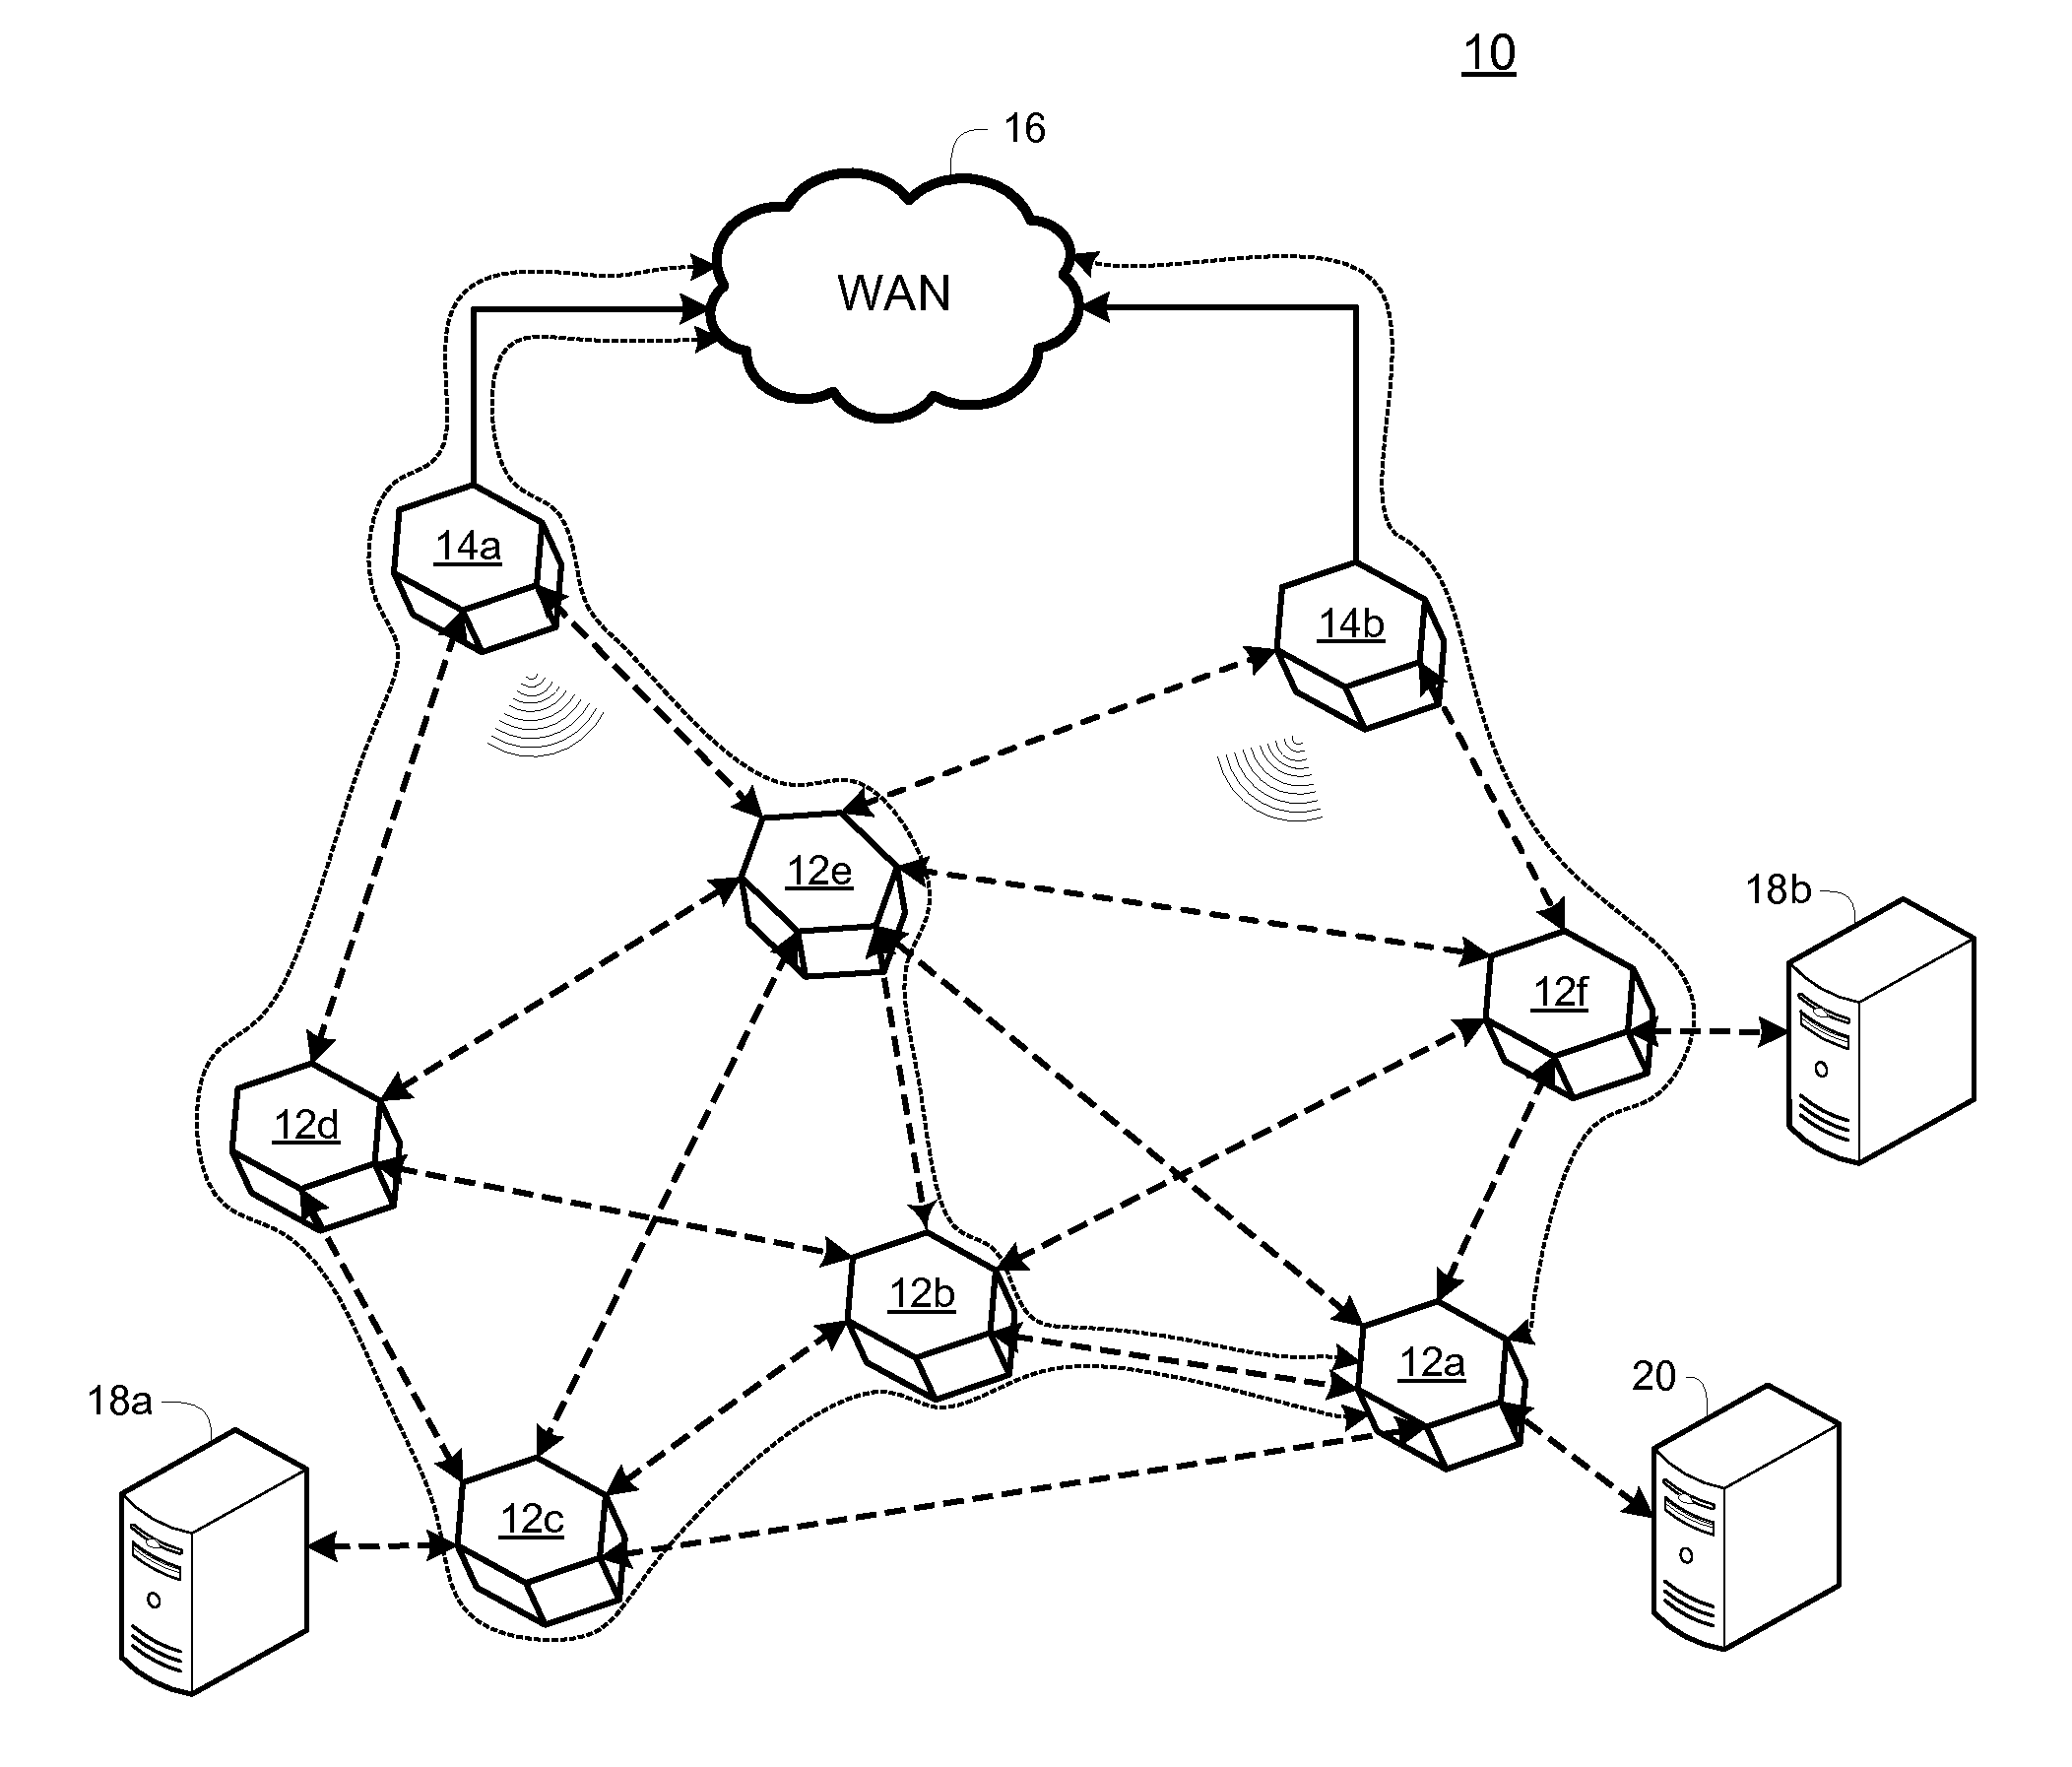 Wireless mesh network transit link topology optimization method and system